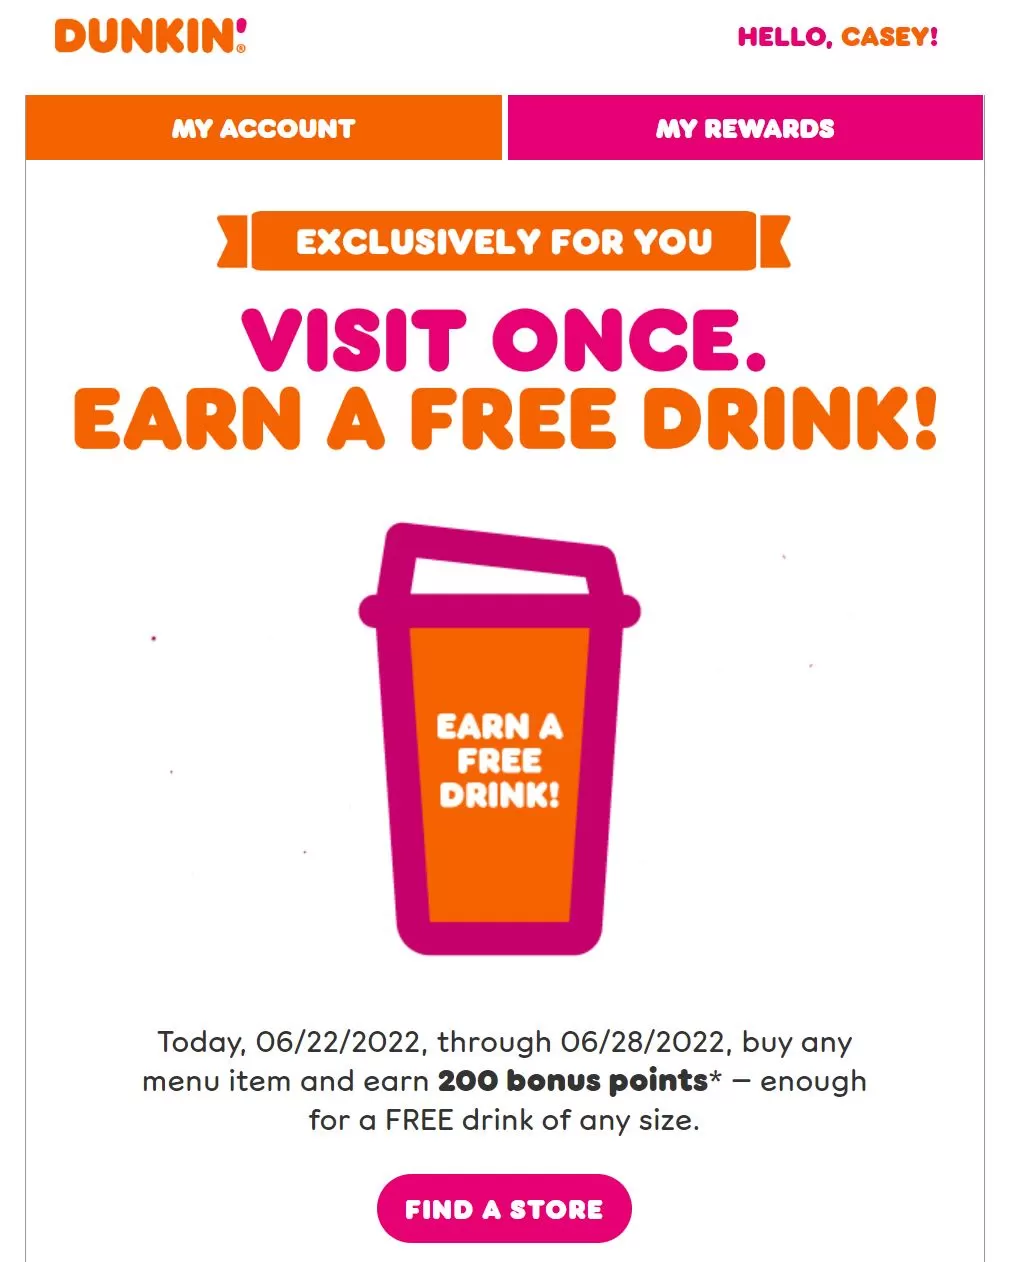 How Do You Get Free Drinks at Dunkin? Top 6 Drinks to Get - Higher Edukitchen